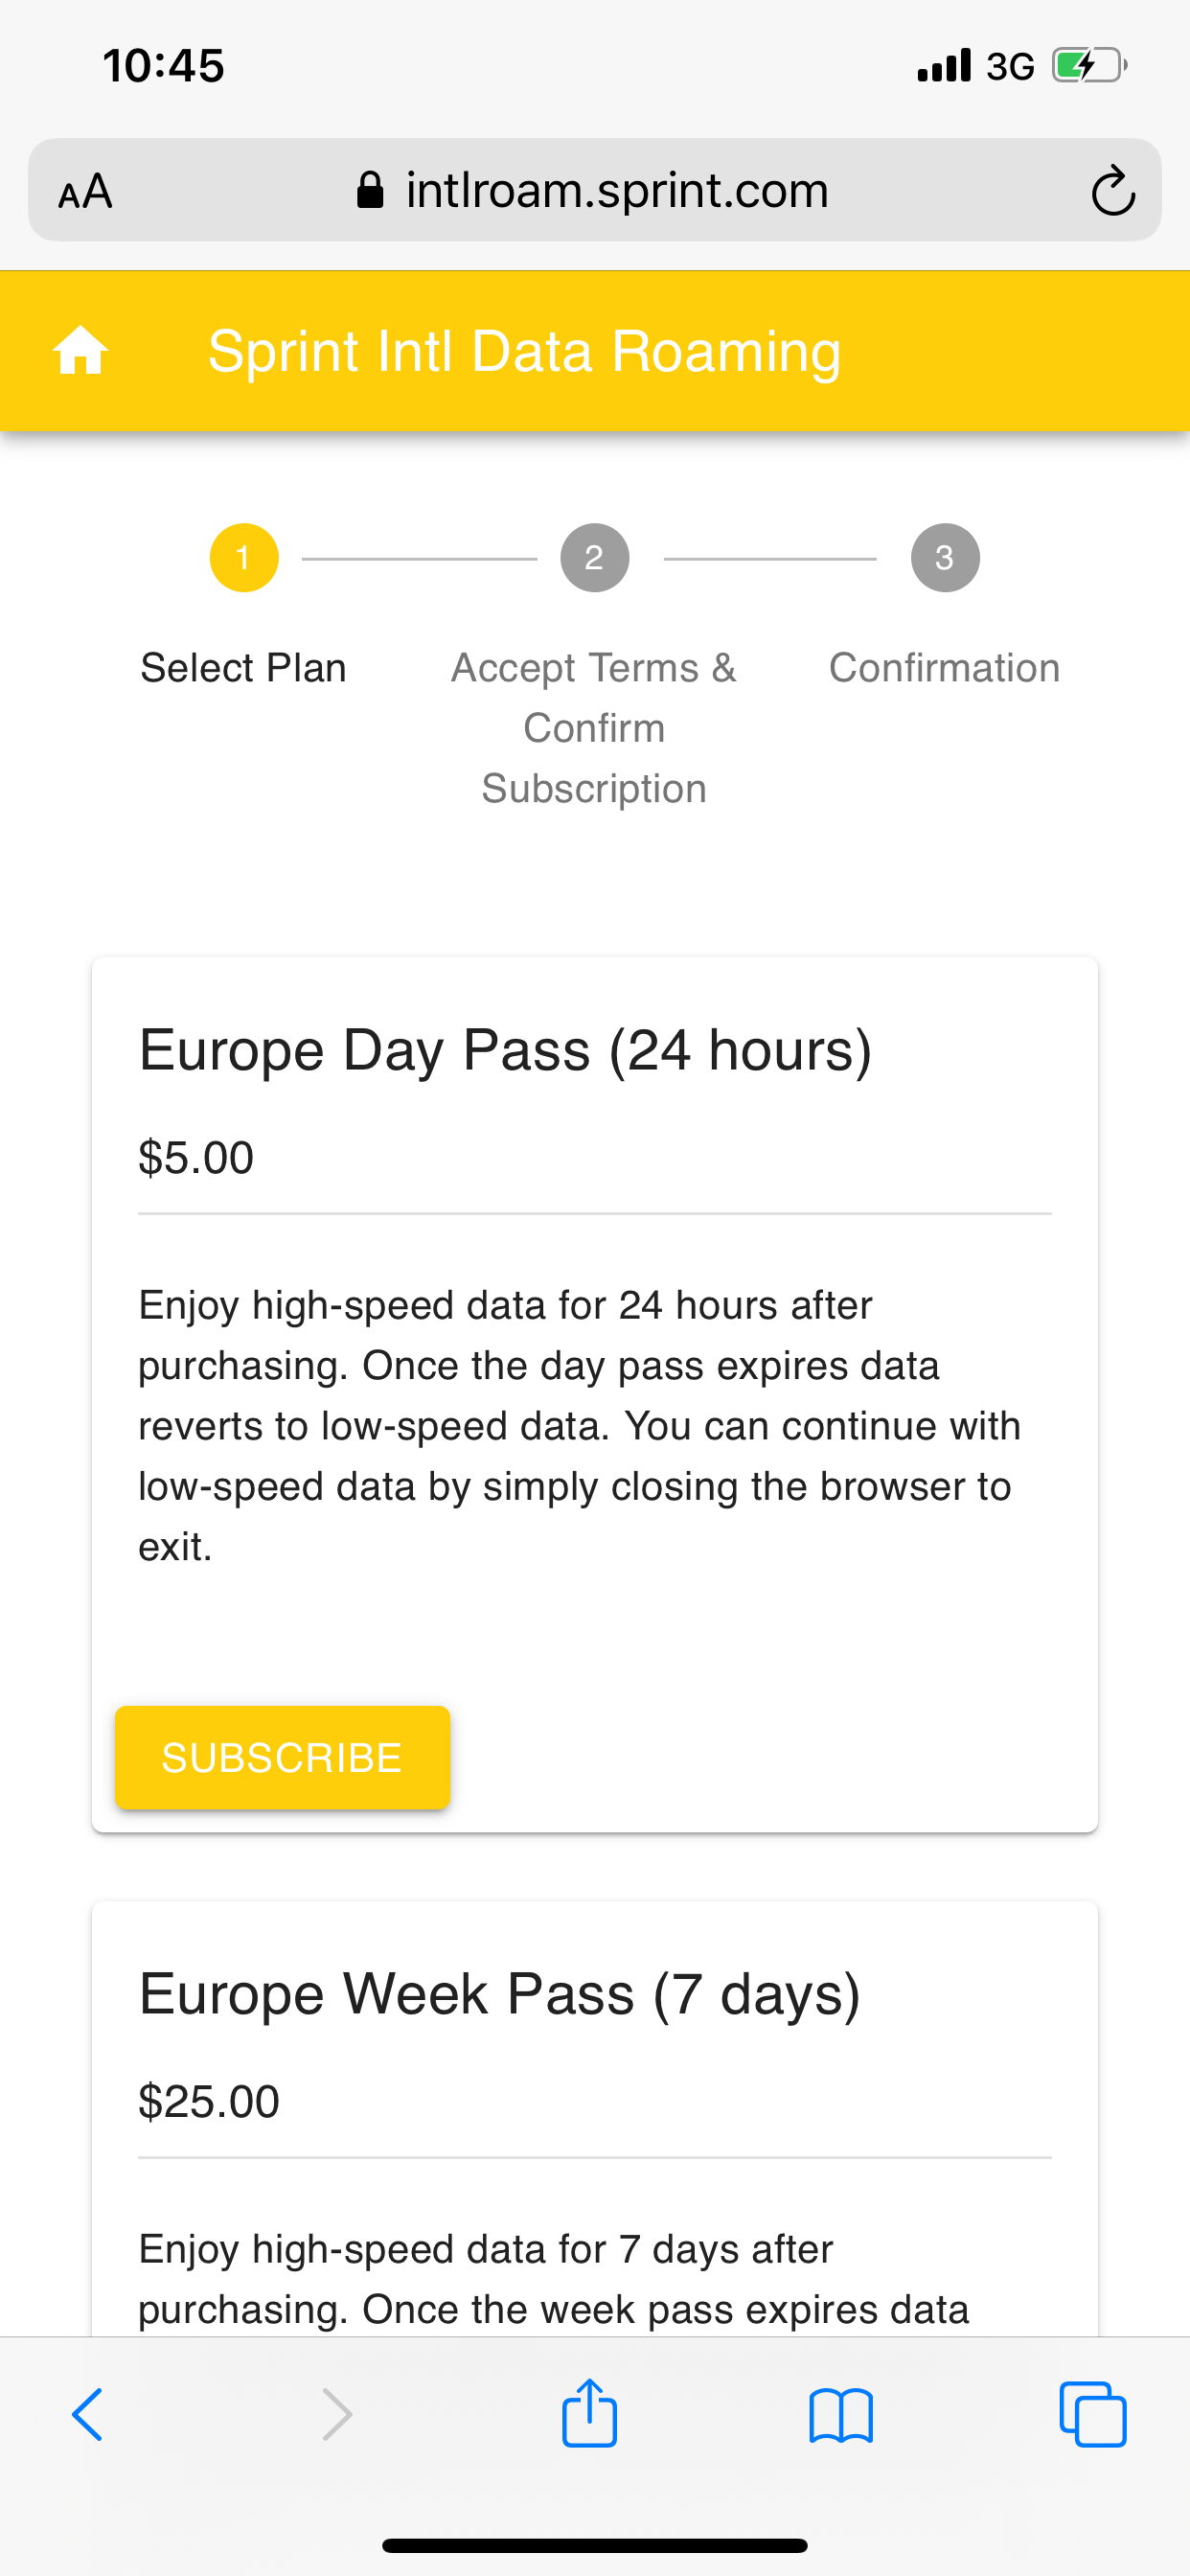 Sprint's International High Speed Data is affordable and fast - Monkey Miles